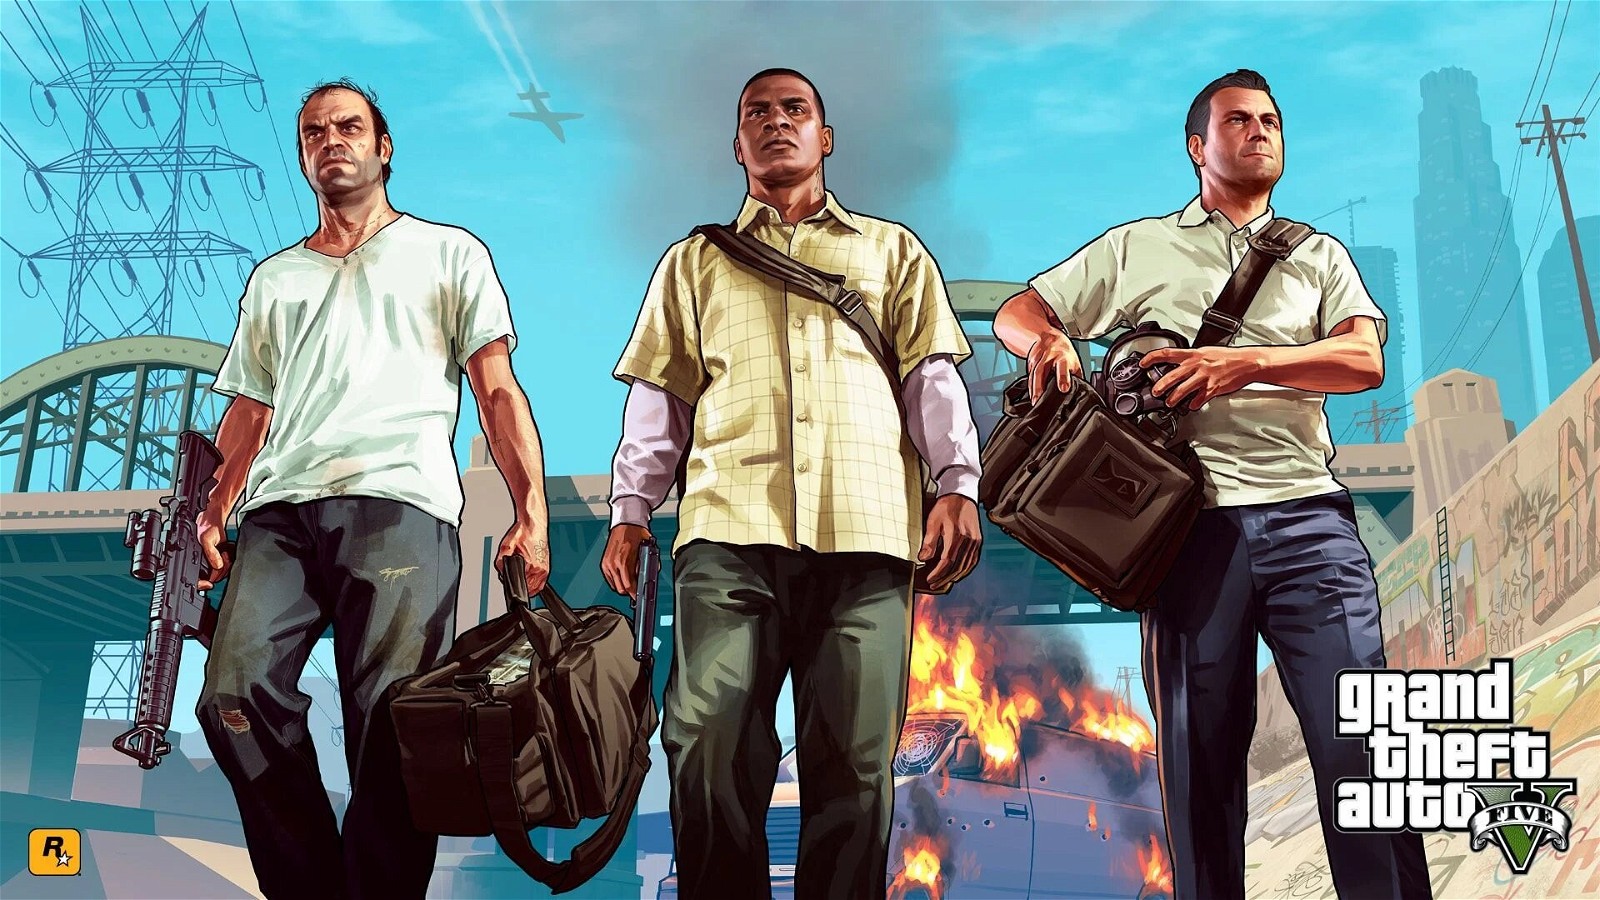 GTA 4 and 5 could be introduced to a new audience